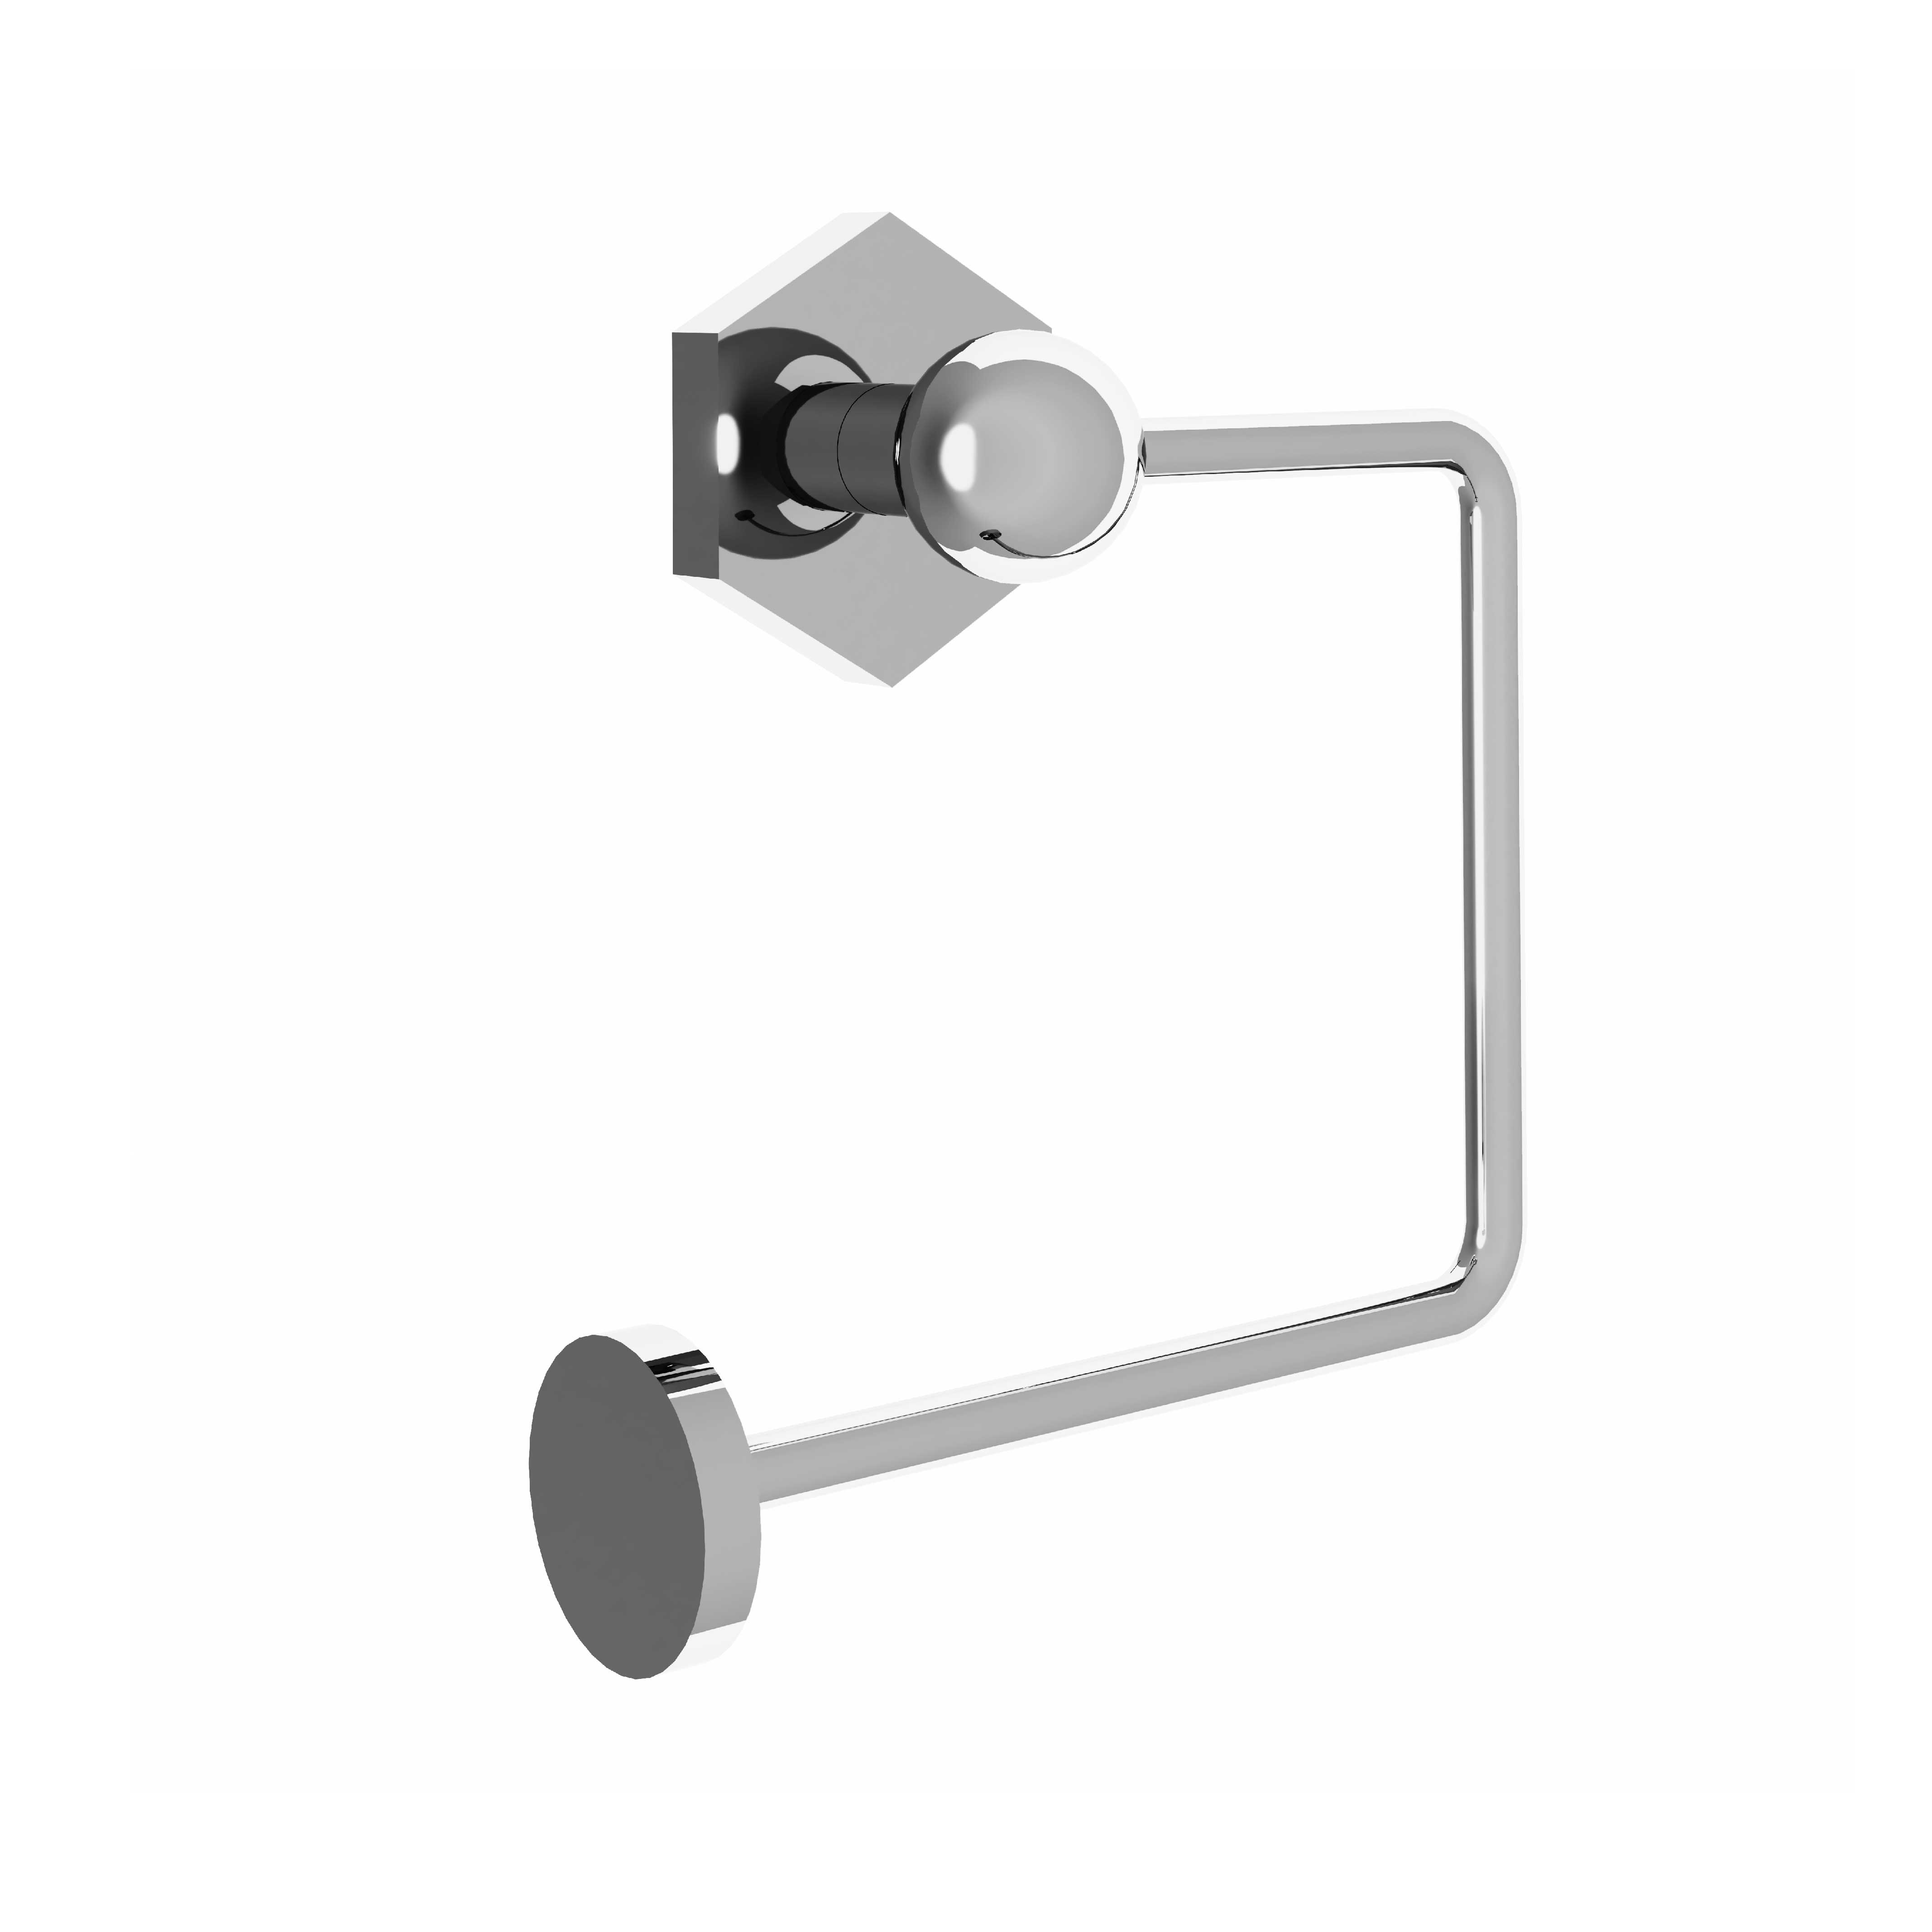 M39-504 Toilet roll holder without cover